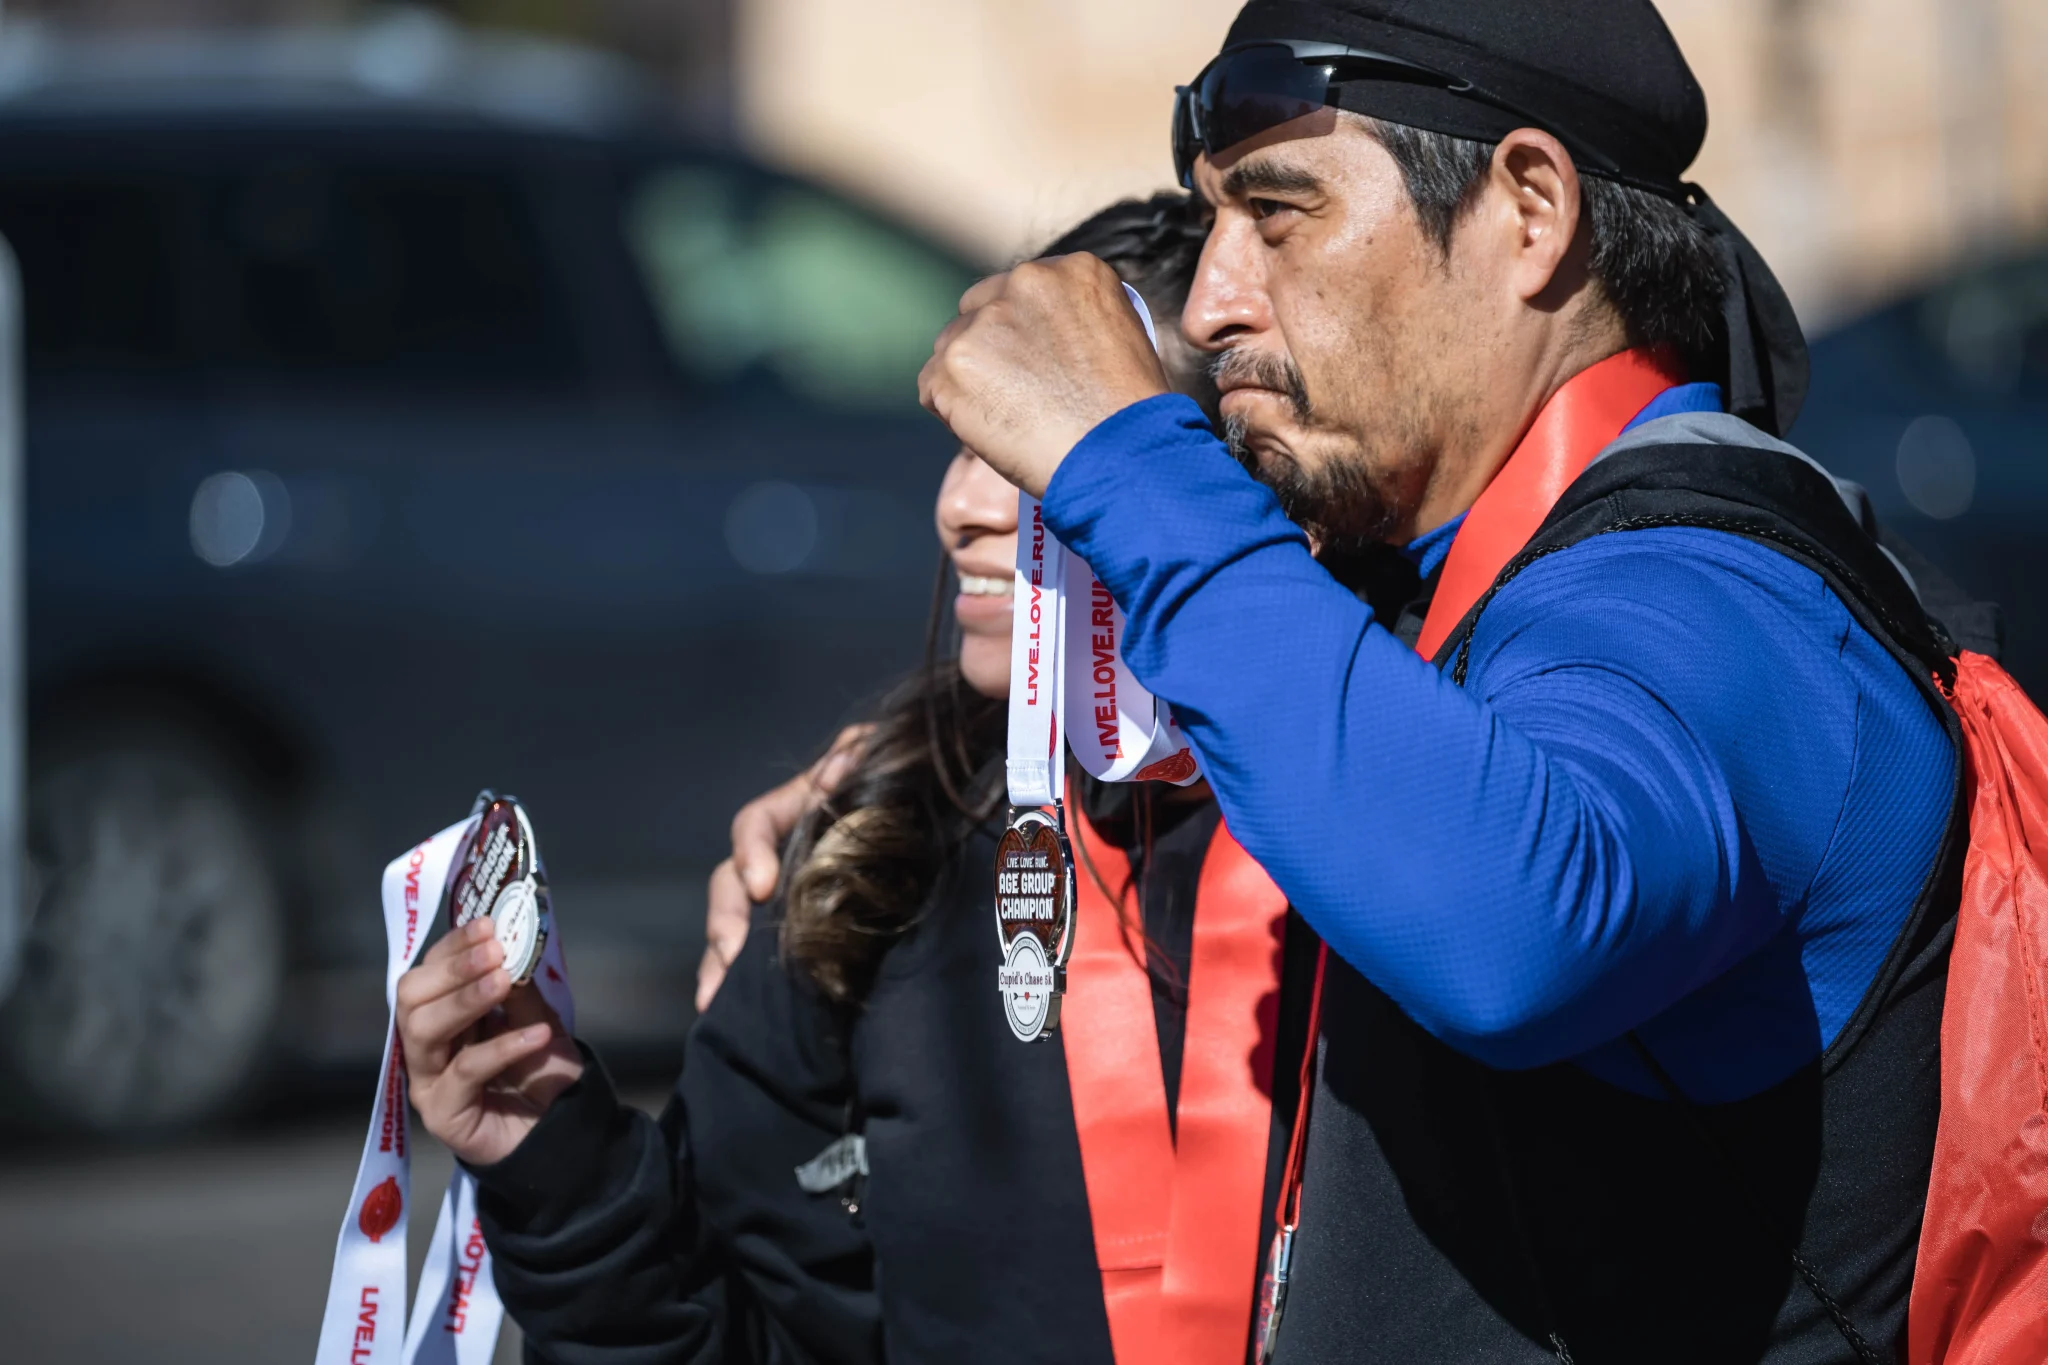 Runners celebrate with their medals at the Cupid's Chase 5K in Mesilla on Saturday, Feb. 12, 2022. Nathan J Fish/Sun-News - lcsun-news.com